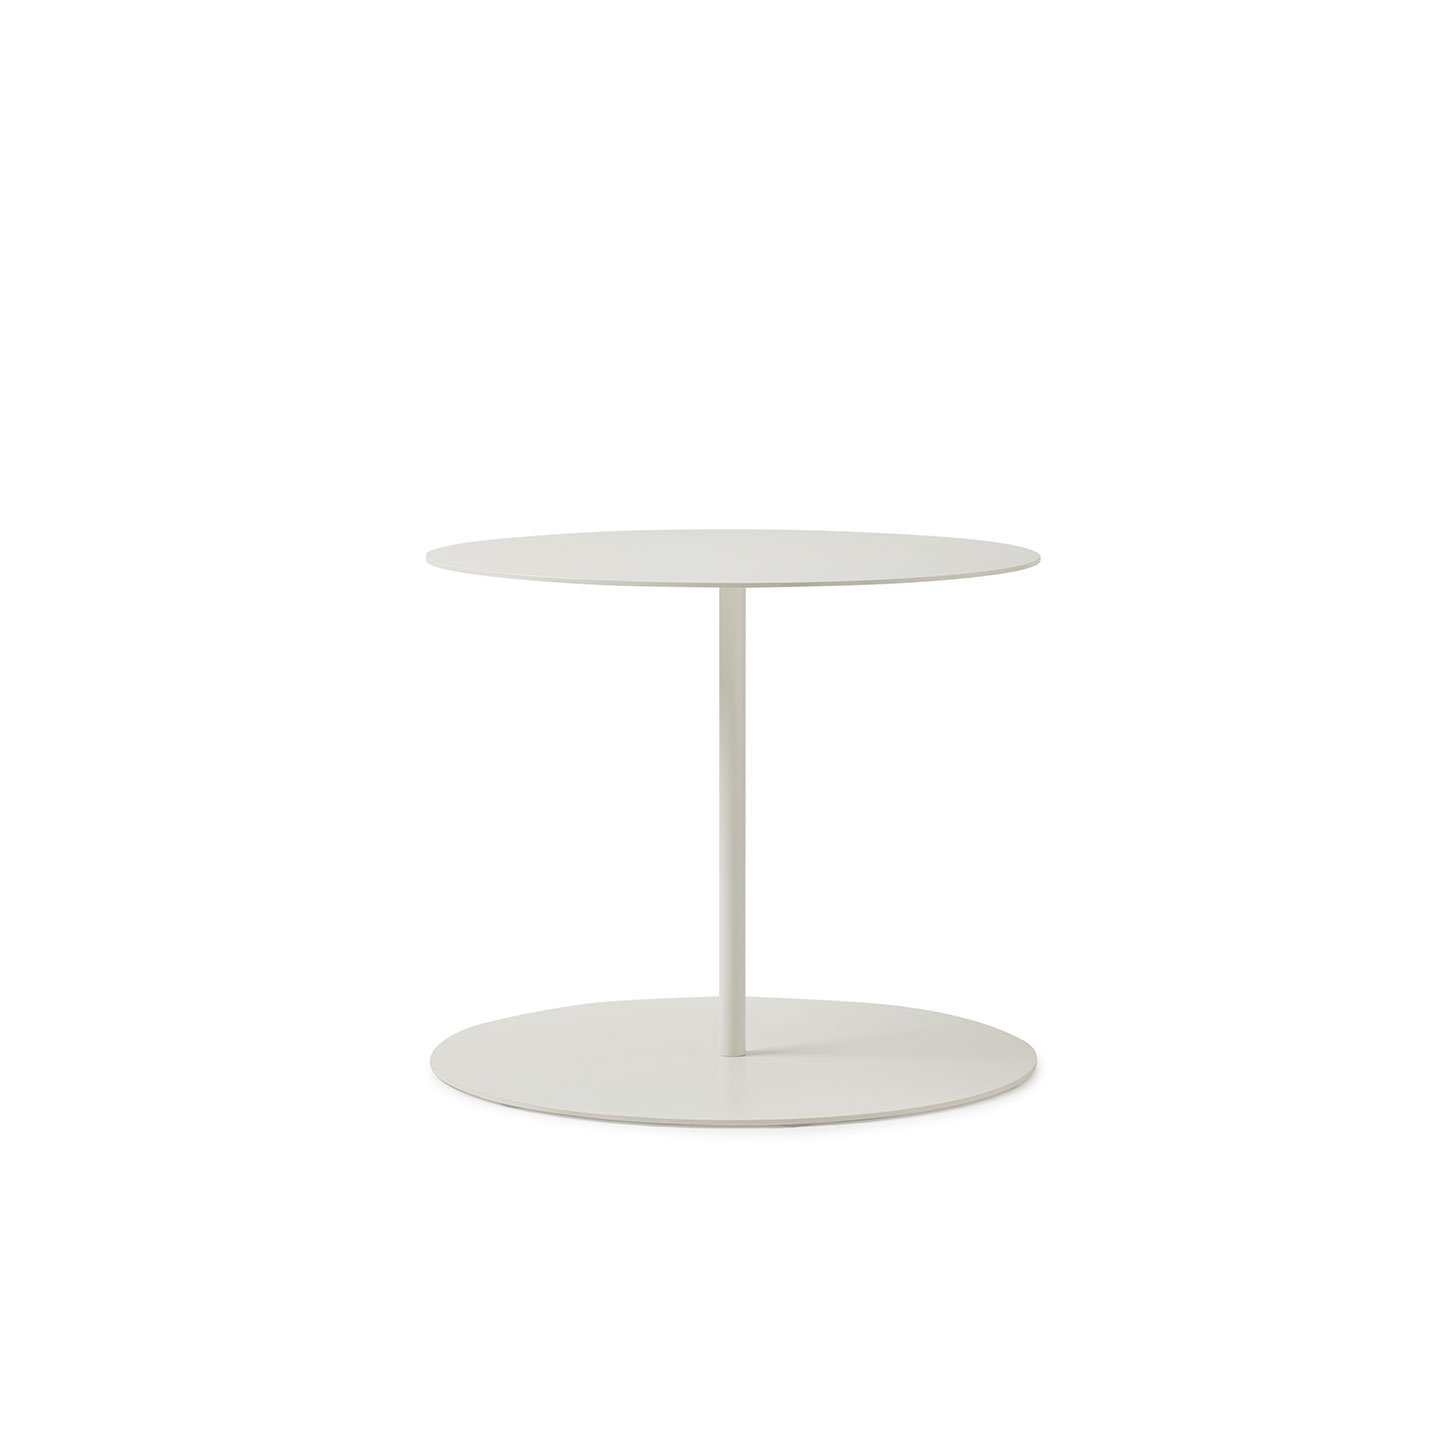 Haworth gong table with circular base and top in white